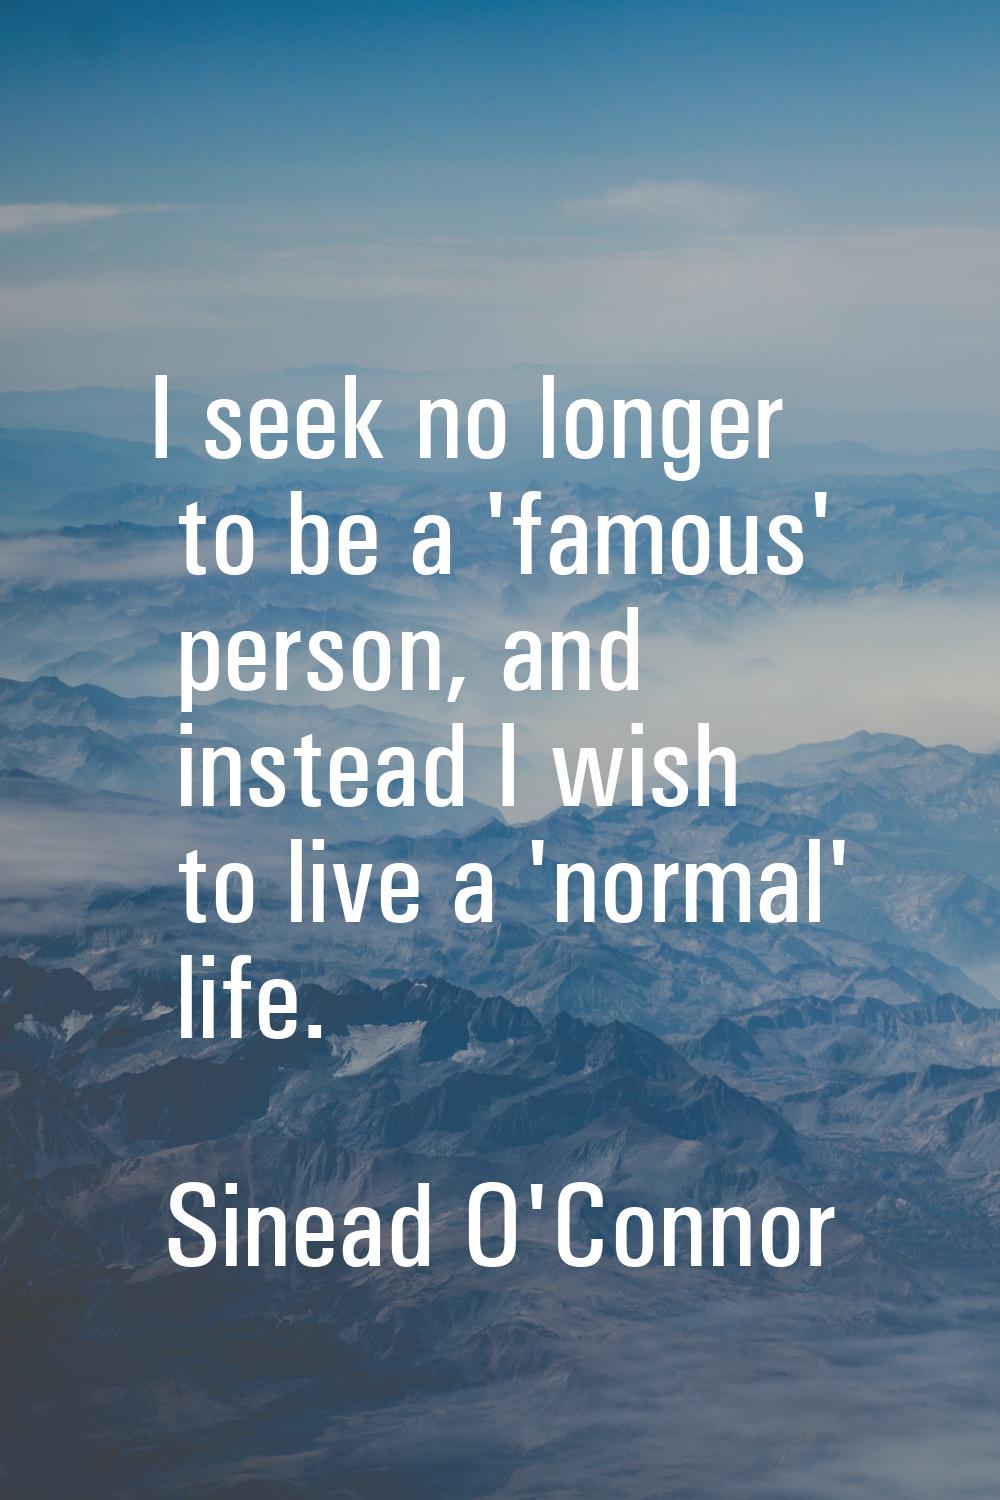 I seek no longer to be a 'famous' person, and instead I wish to live a 'normal' life.